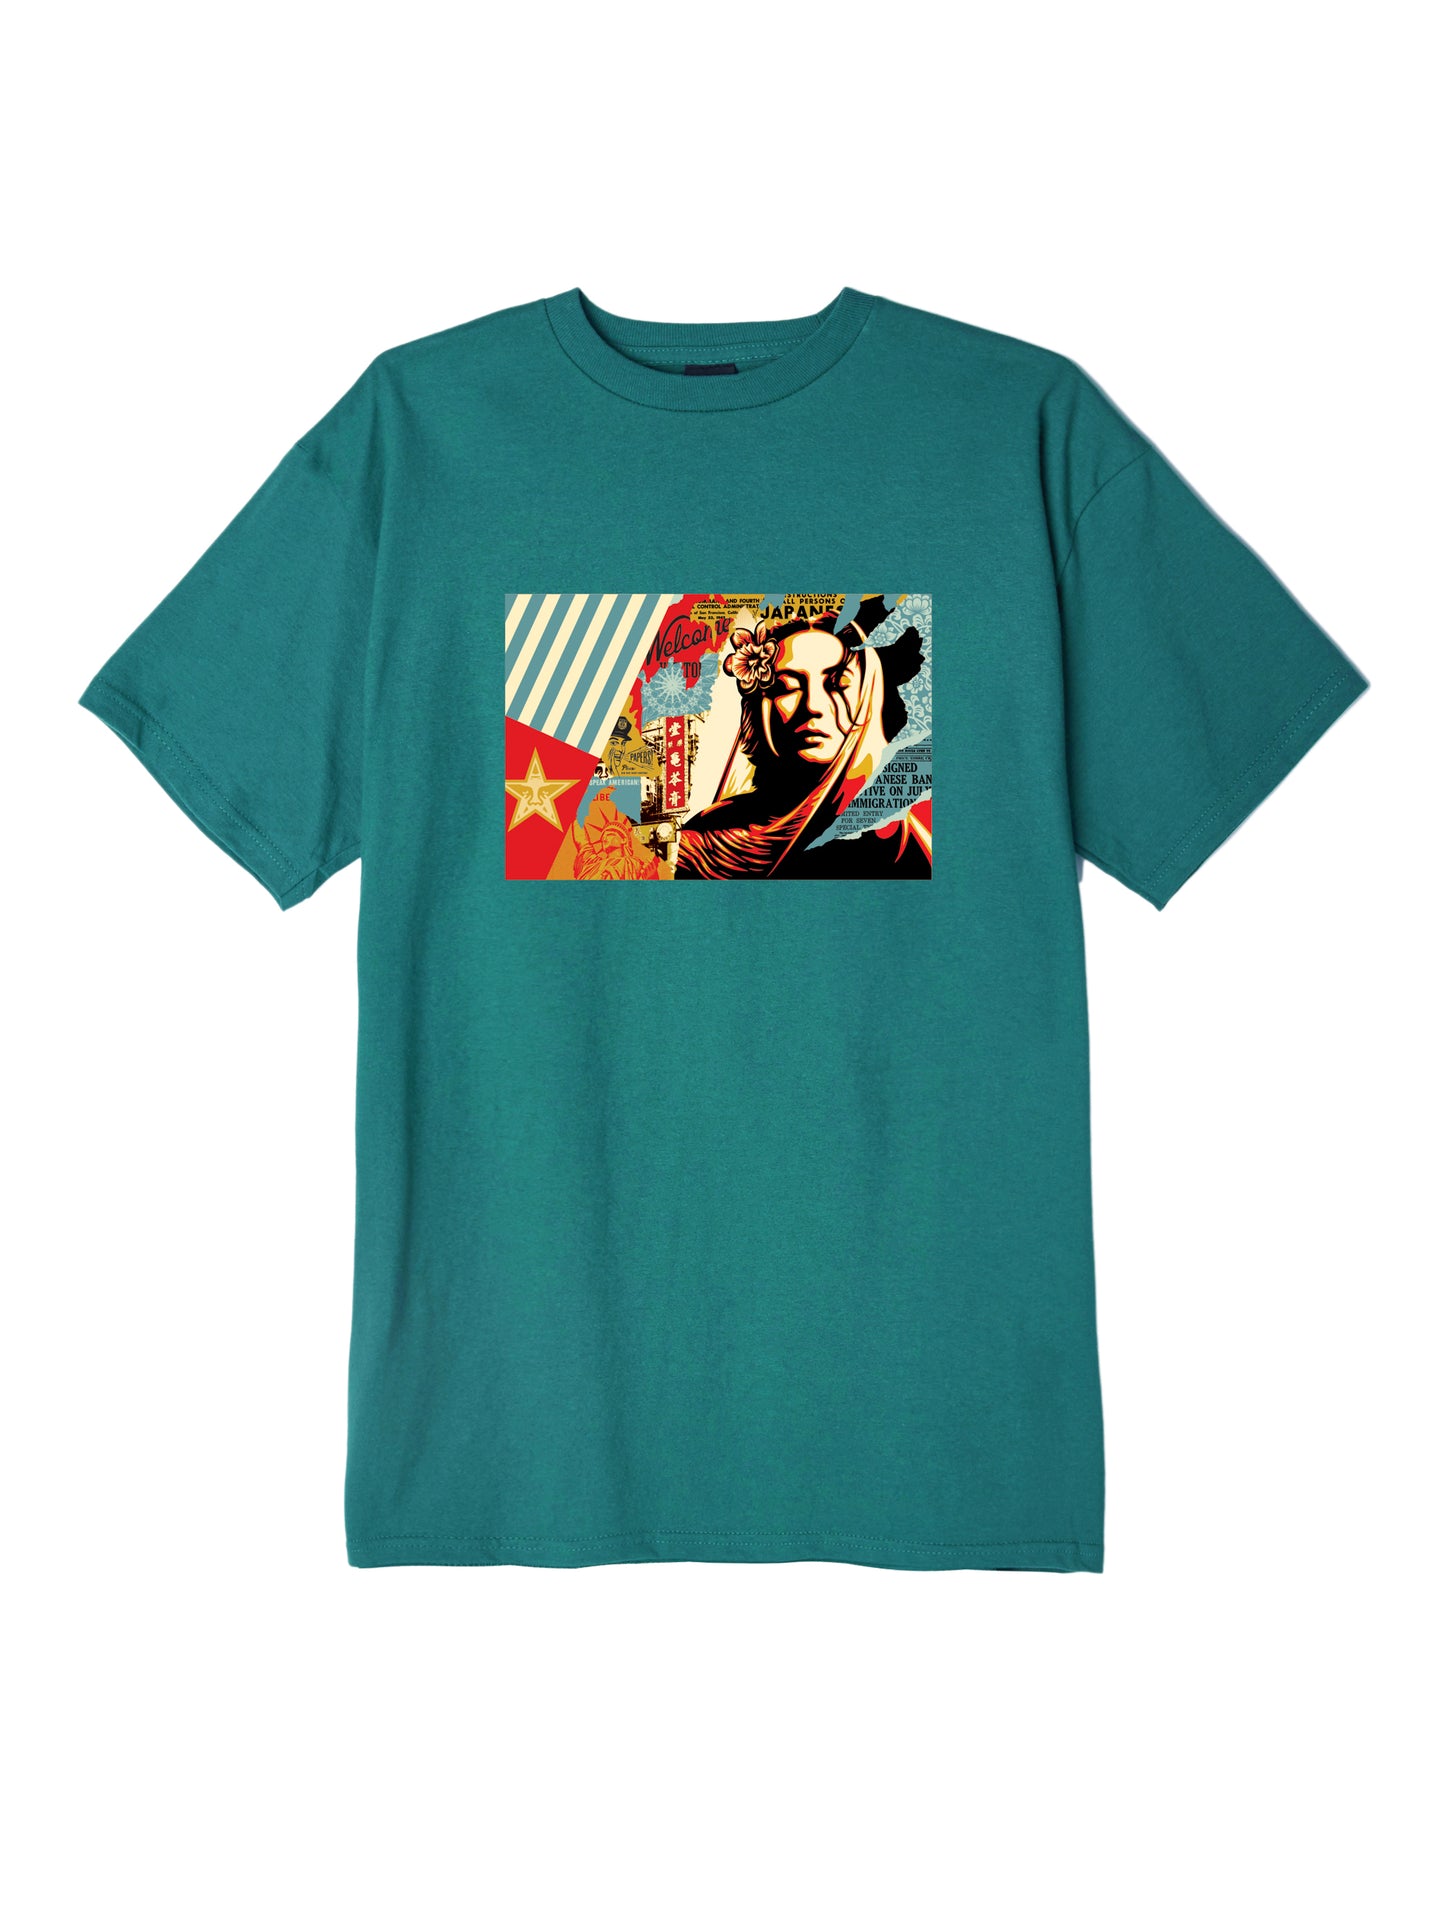 OBEY - Welcome Visitor Men's Tee, Teal